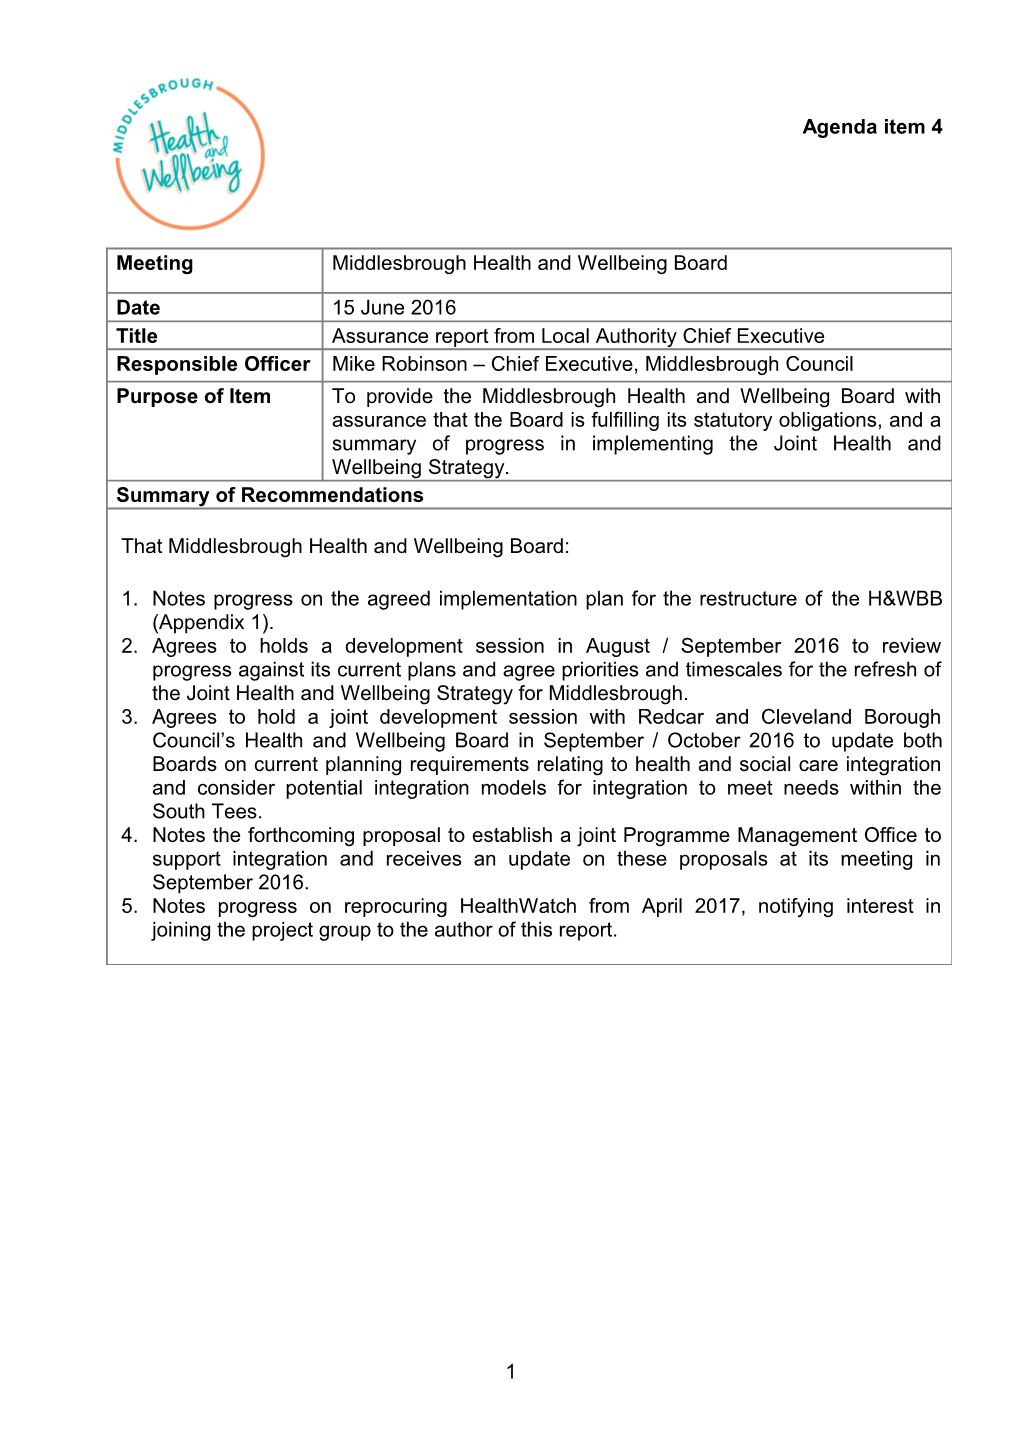 Notes Progress on the Agreed Implementation Plan for the Restructure of the H&WBB (Appendix 1)